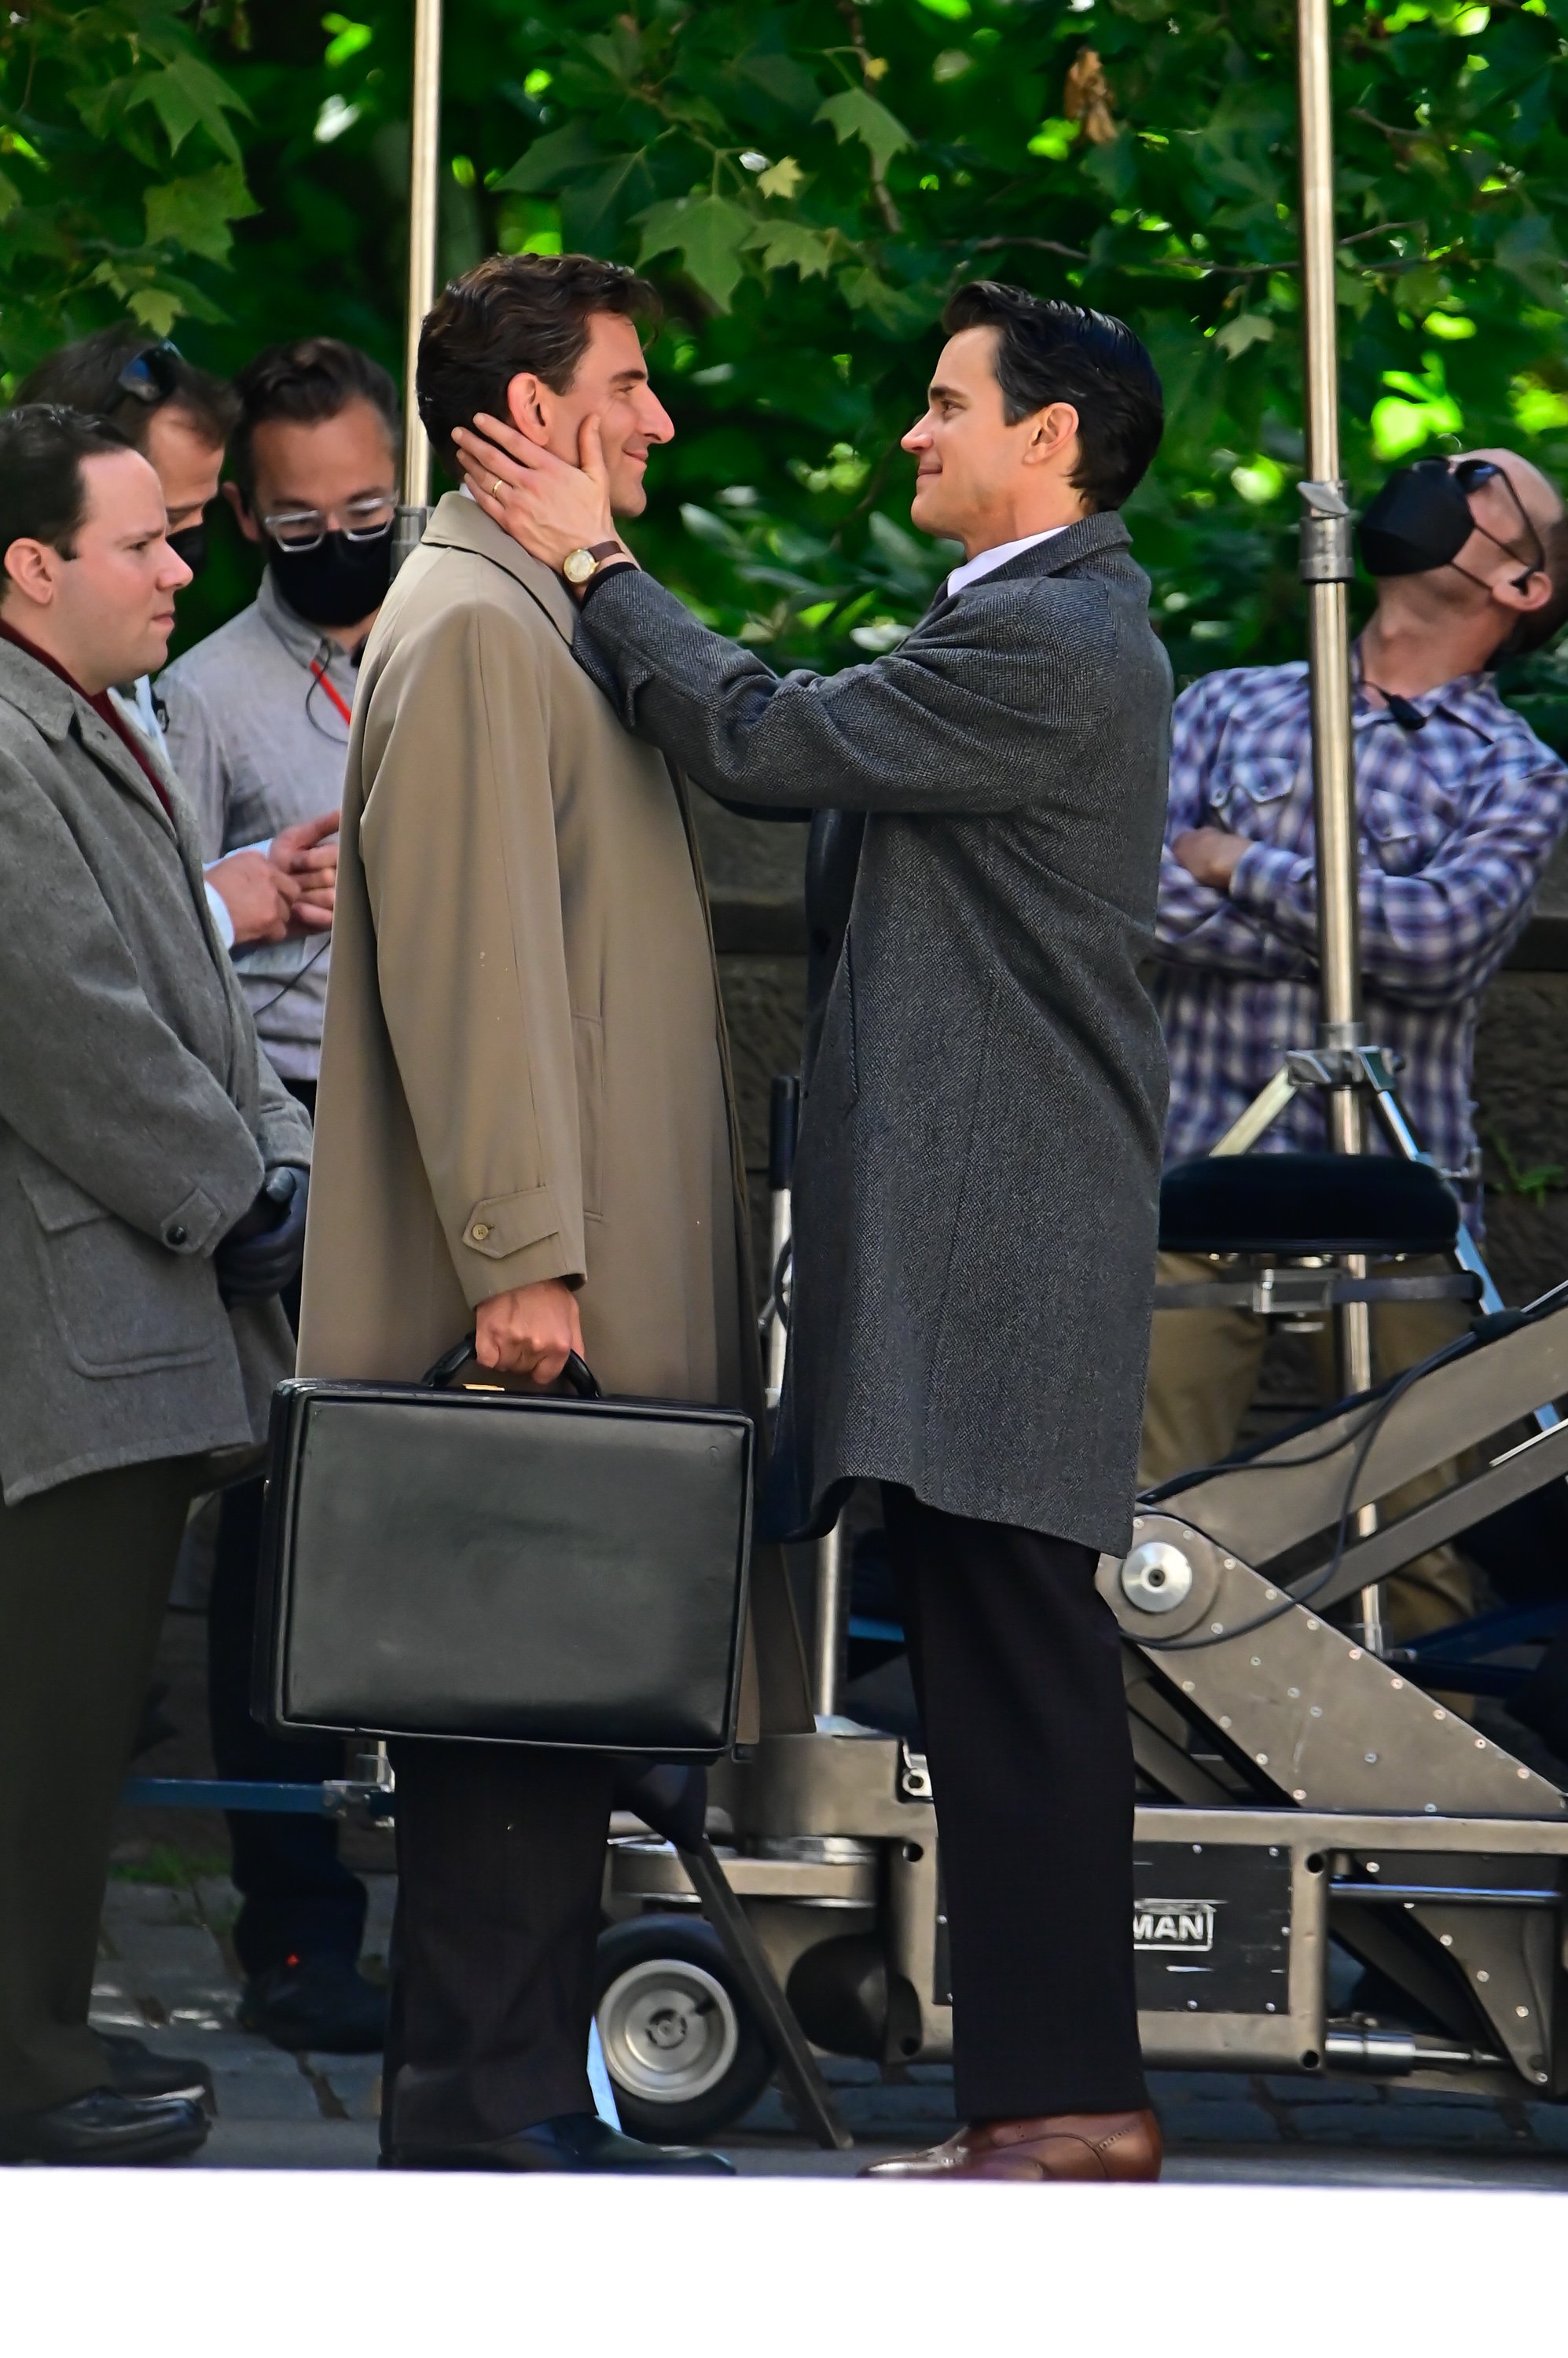 Matt Bomer and Bradley Cooper on the "Maestro" film set in Central Park on June 6, 2022 | Source: Getty Images